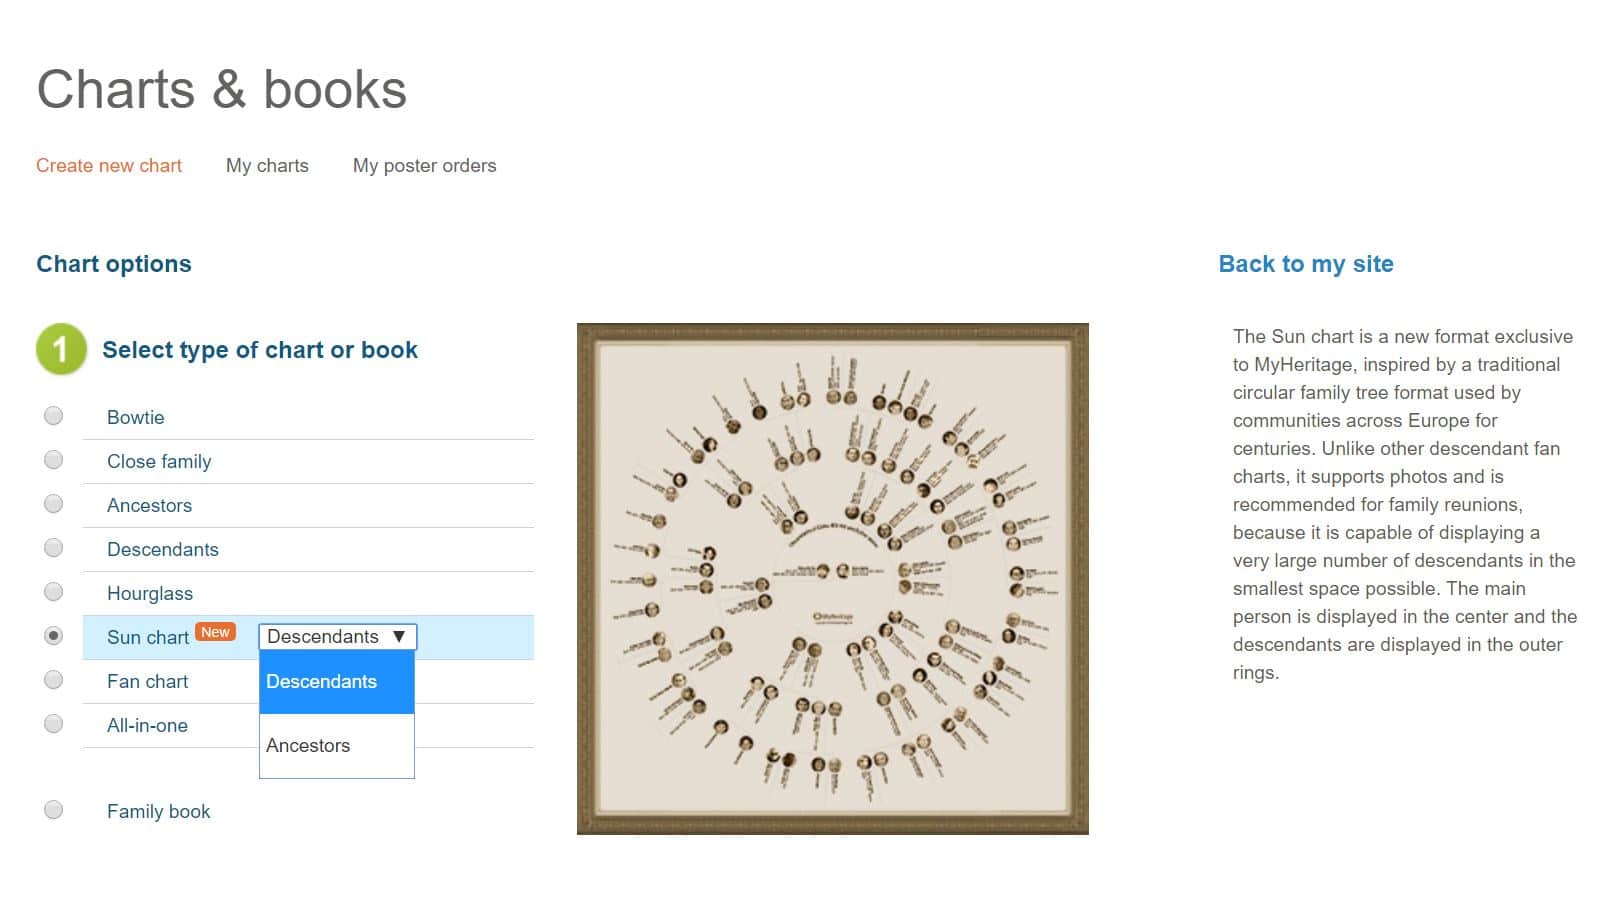 Display and Print a Genealogy Fan Chart in 7 Different Ways